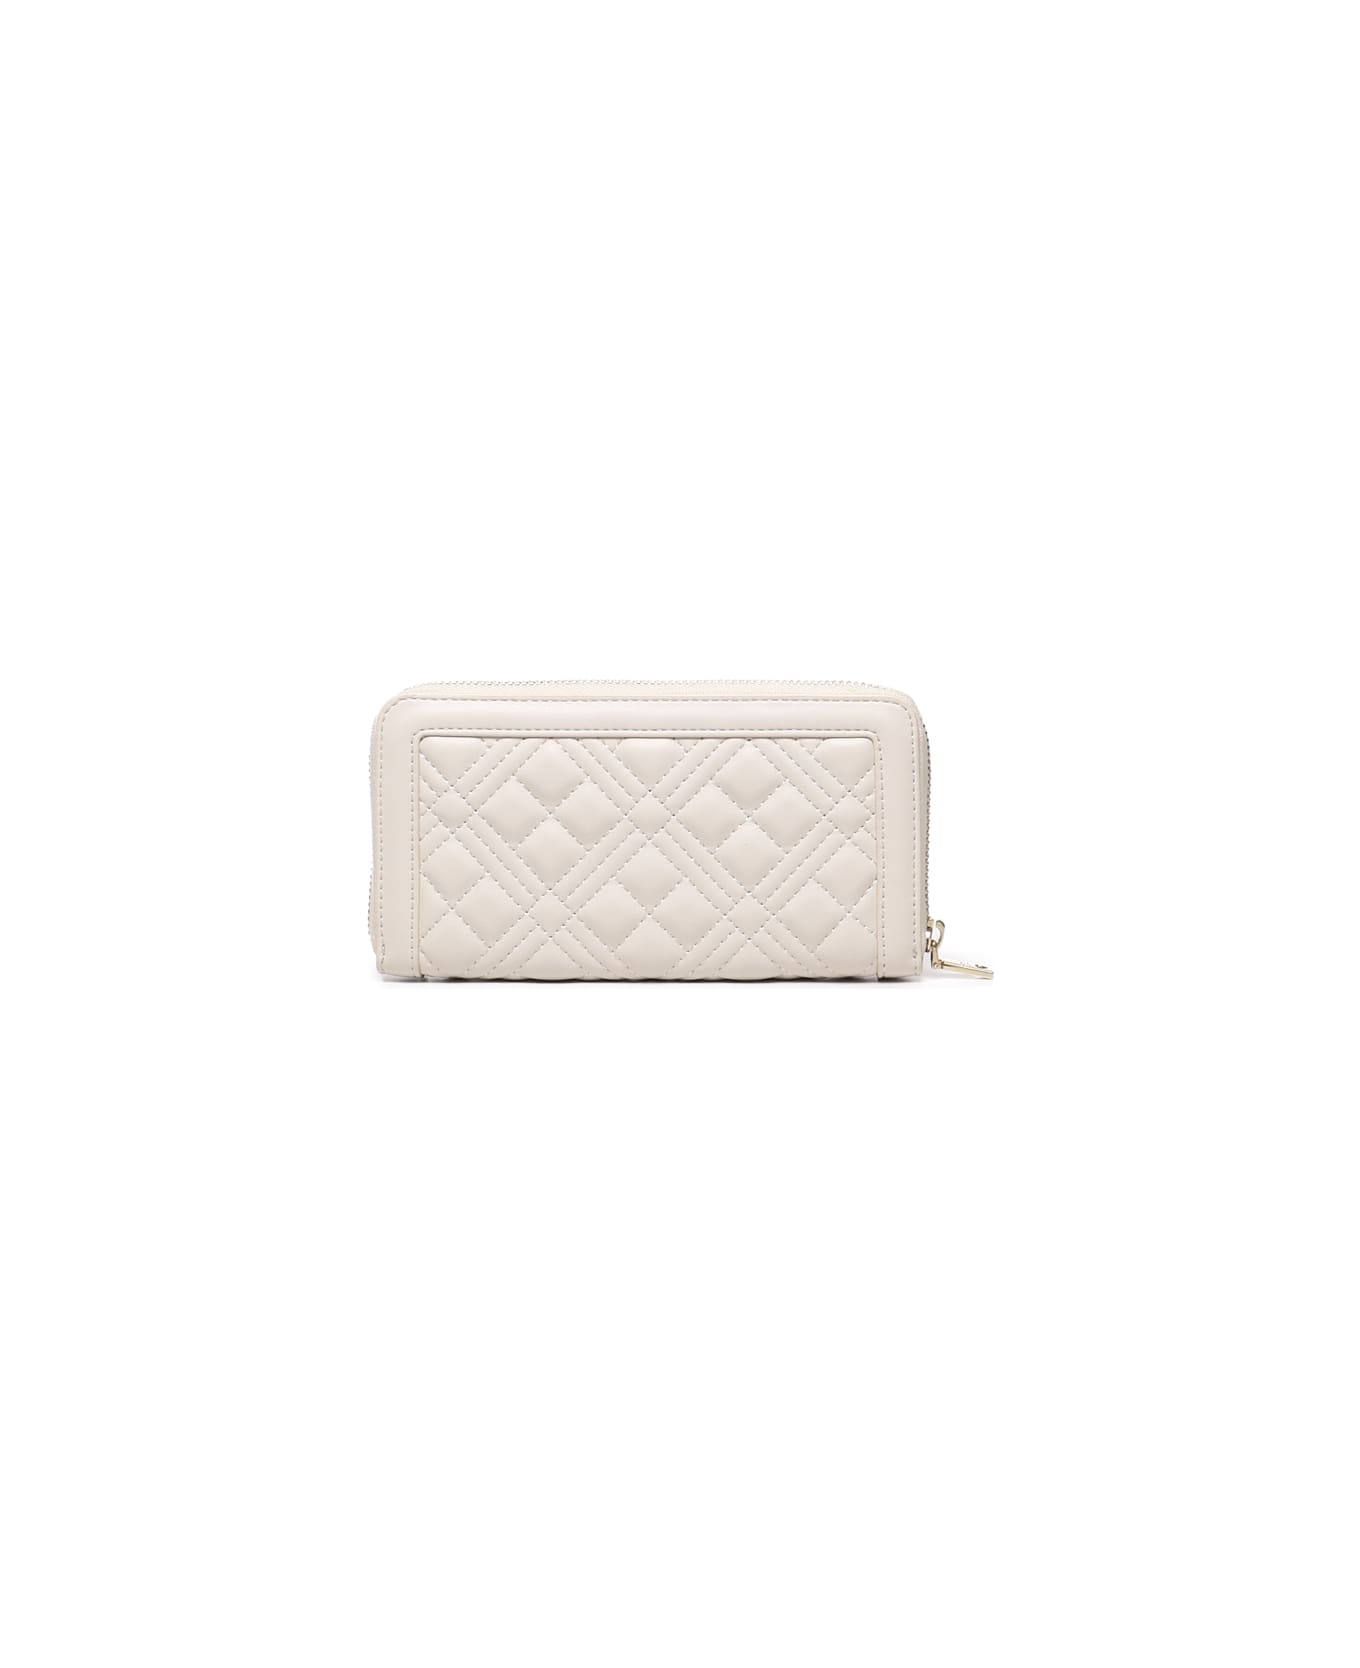 Love Moschino Wallet With Logo - Ivory 財布